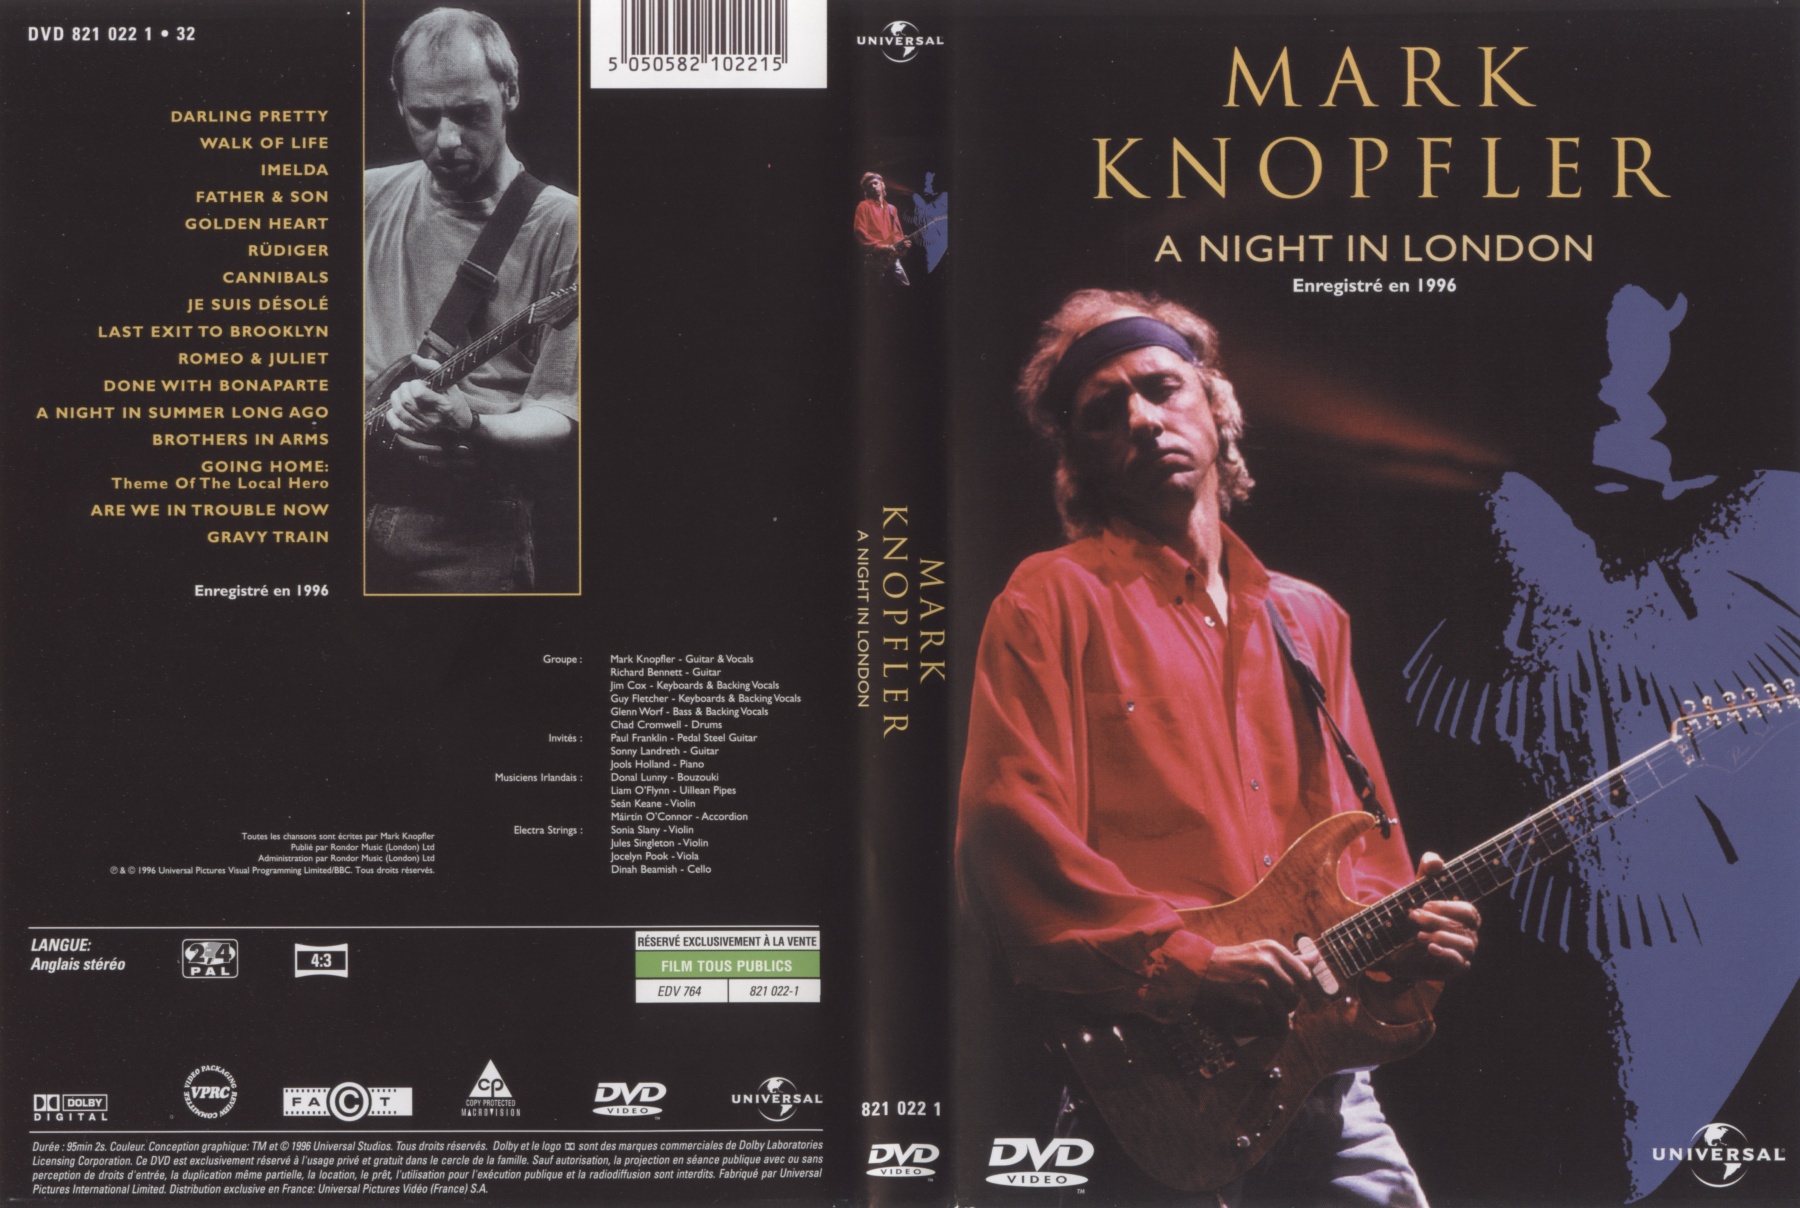 Jaquette DVD Mark Knopfler a night in London 1996